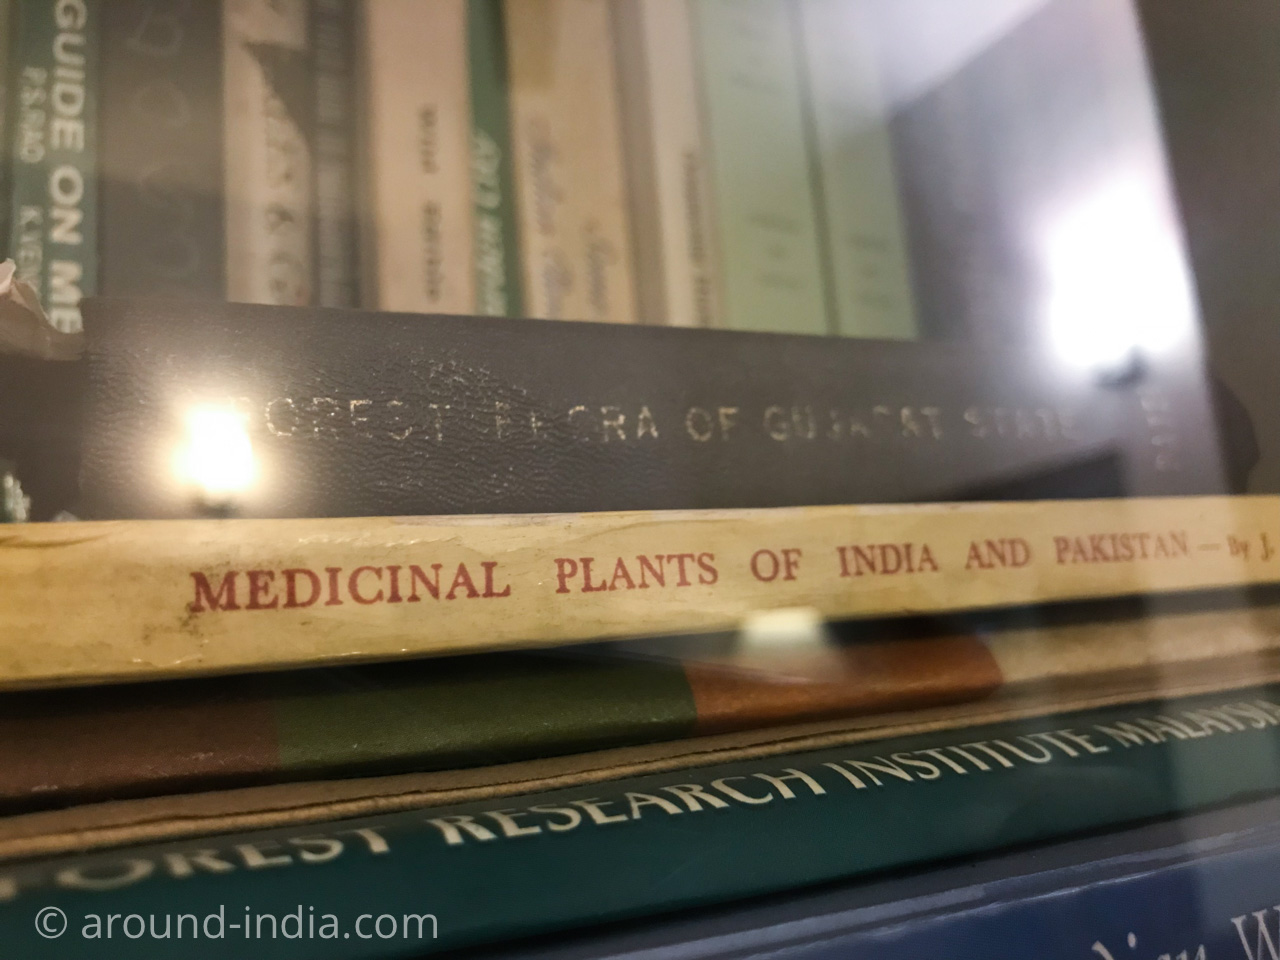 Medicinal Plants of India and